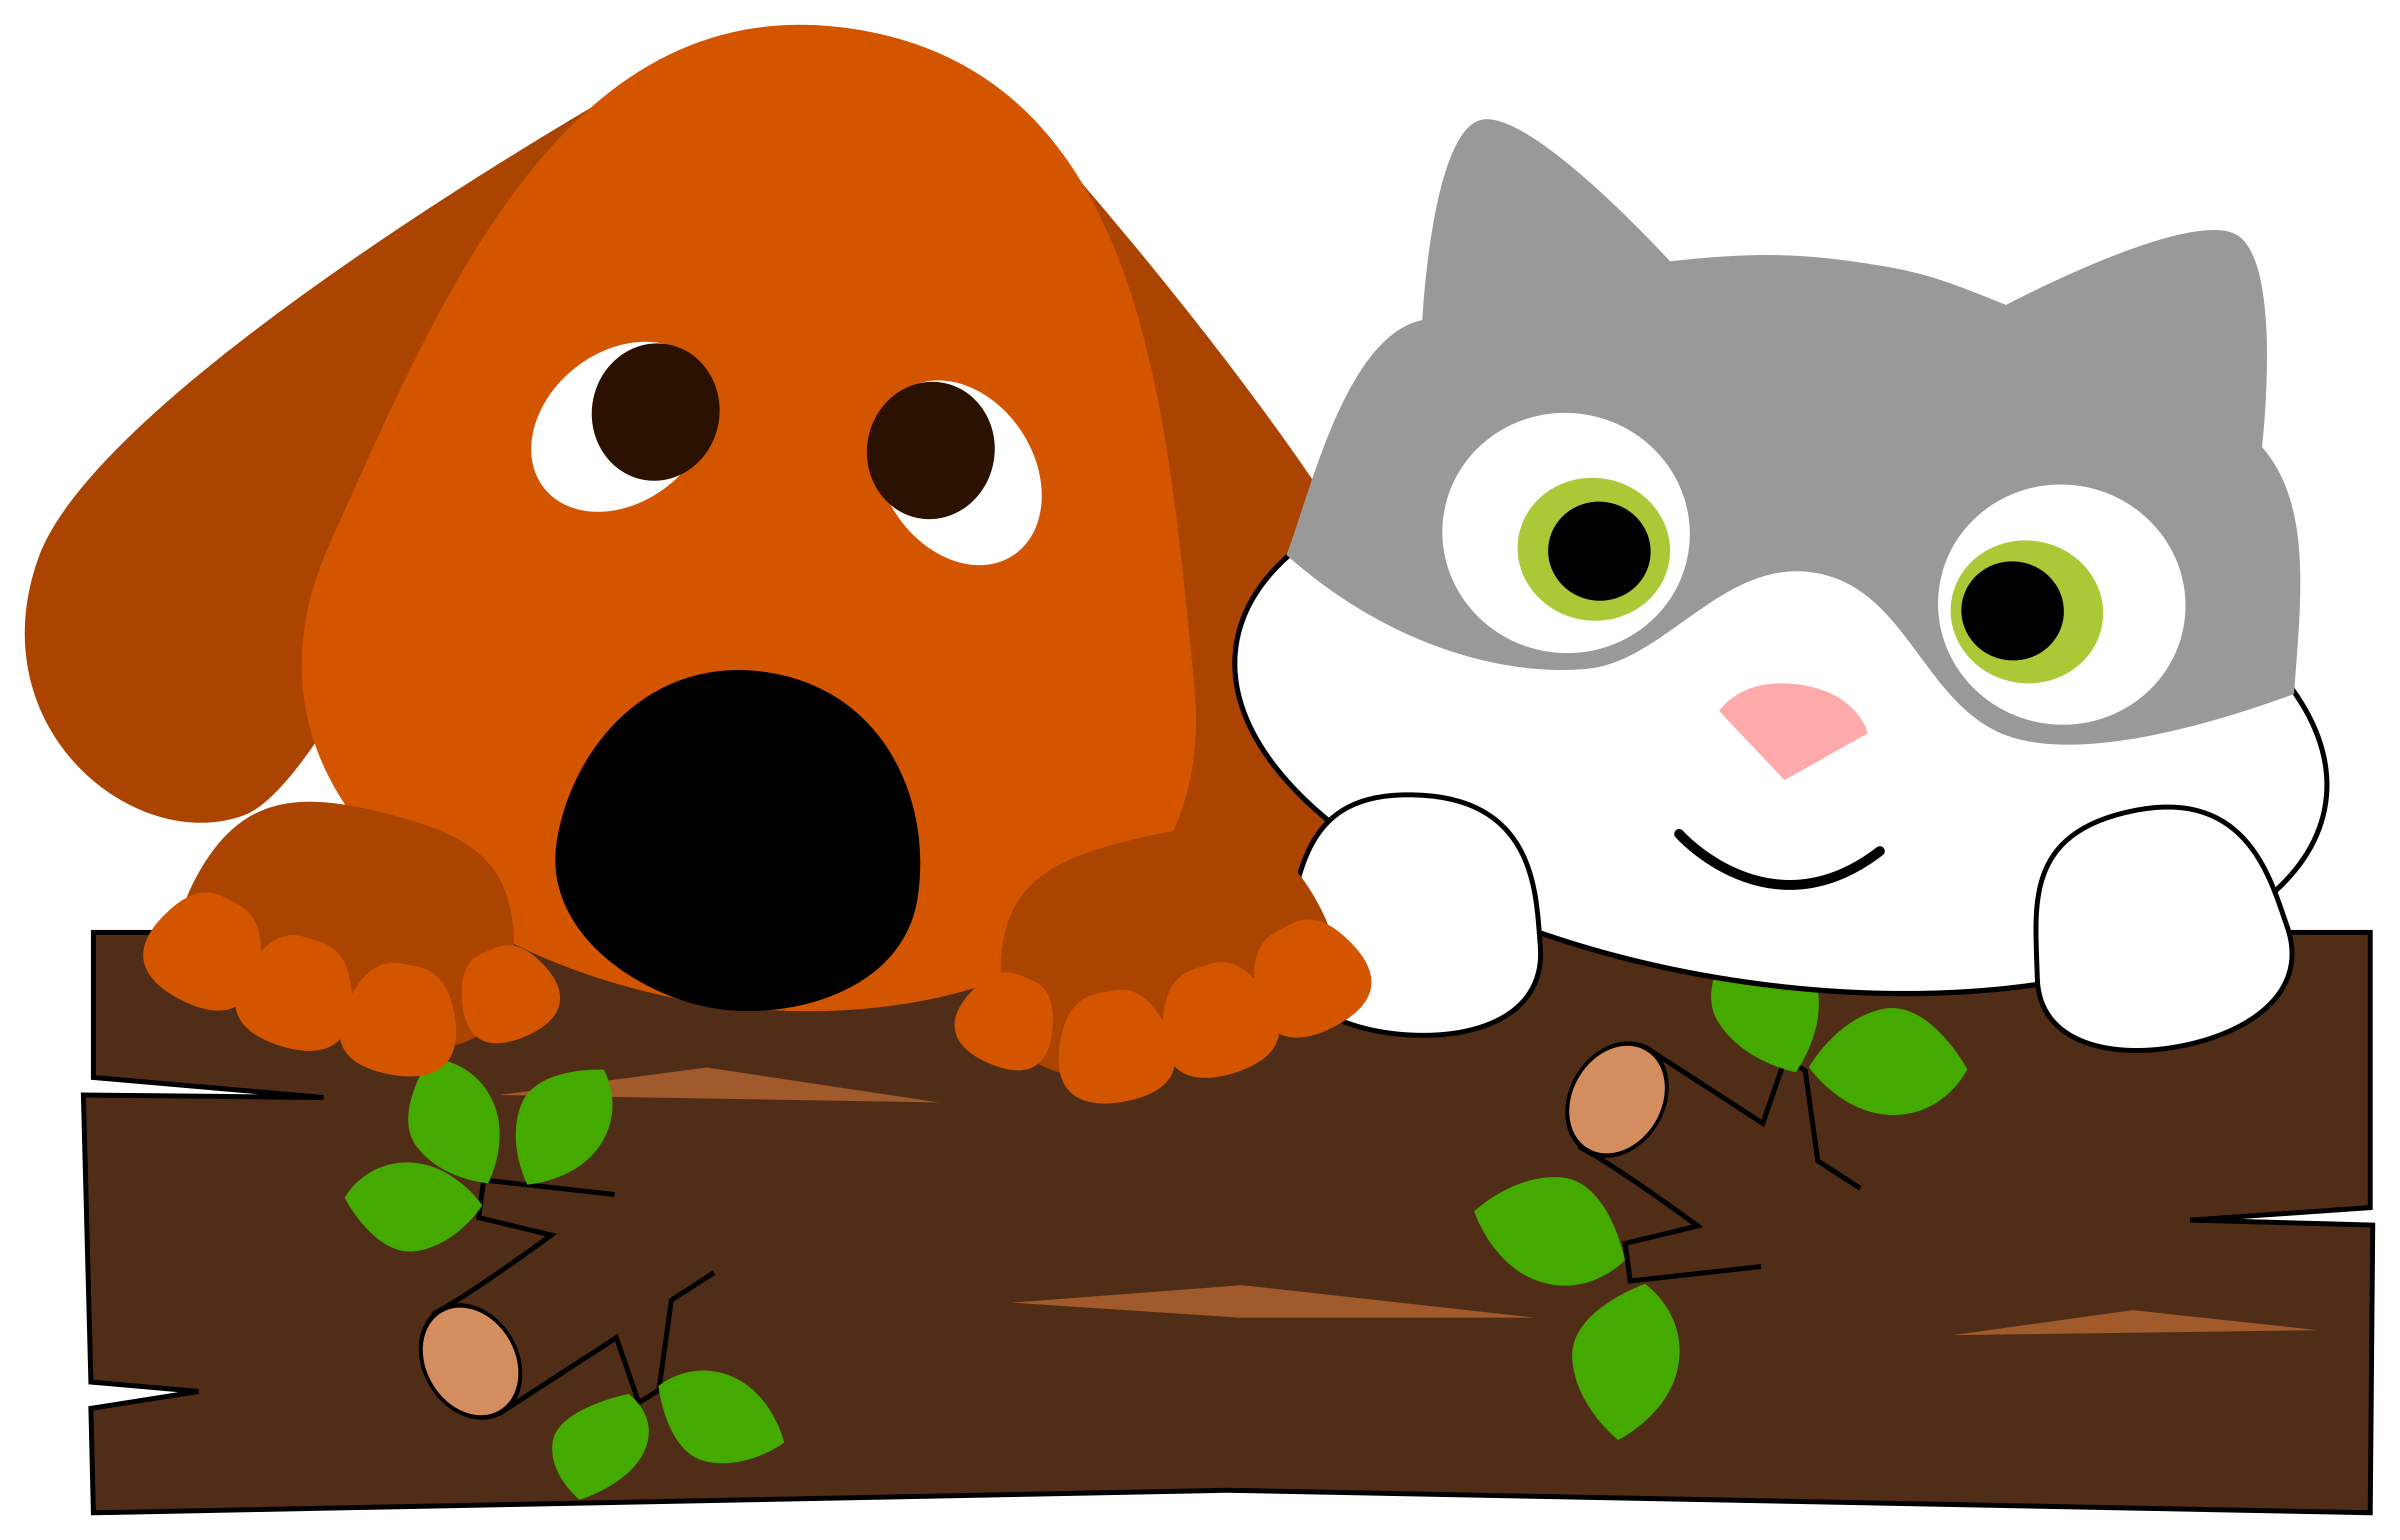 Dog and Cat Behind Tree Trunk vector clipart image - Free stock photo